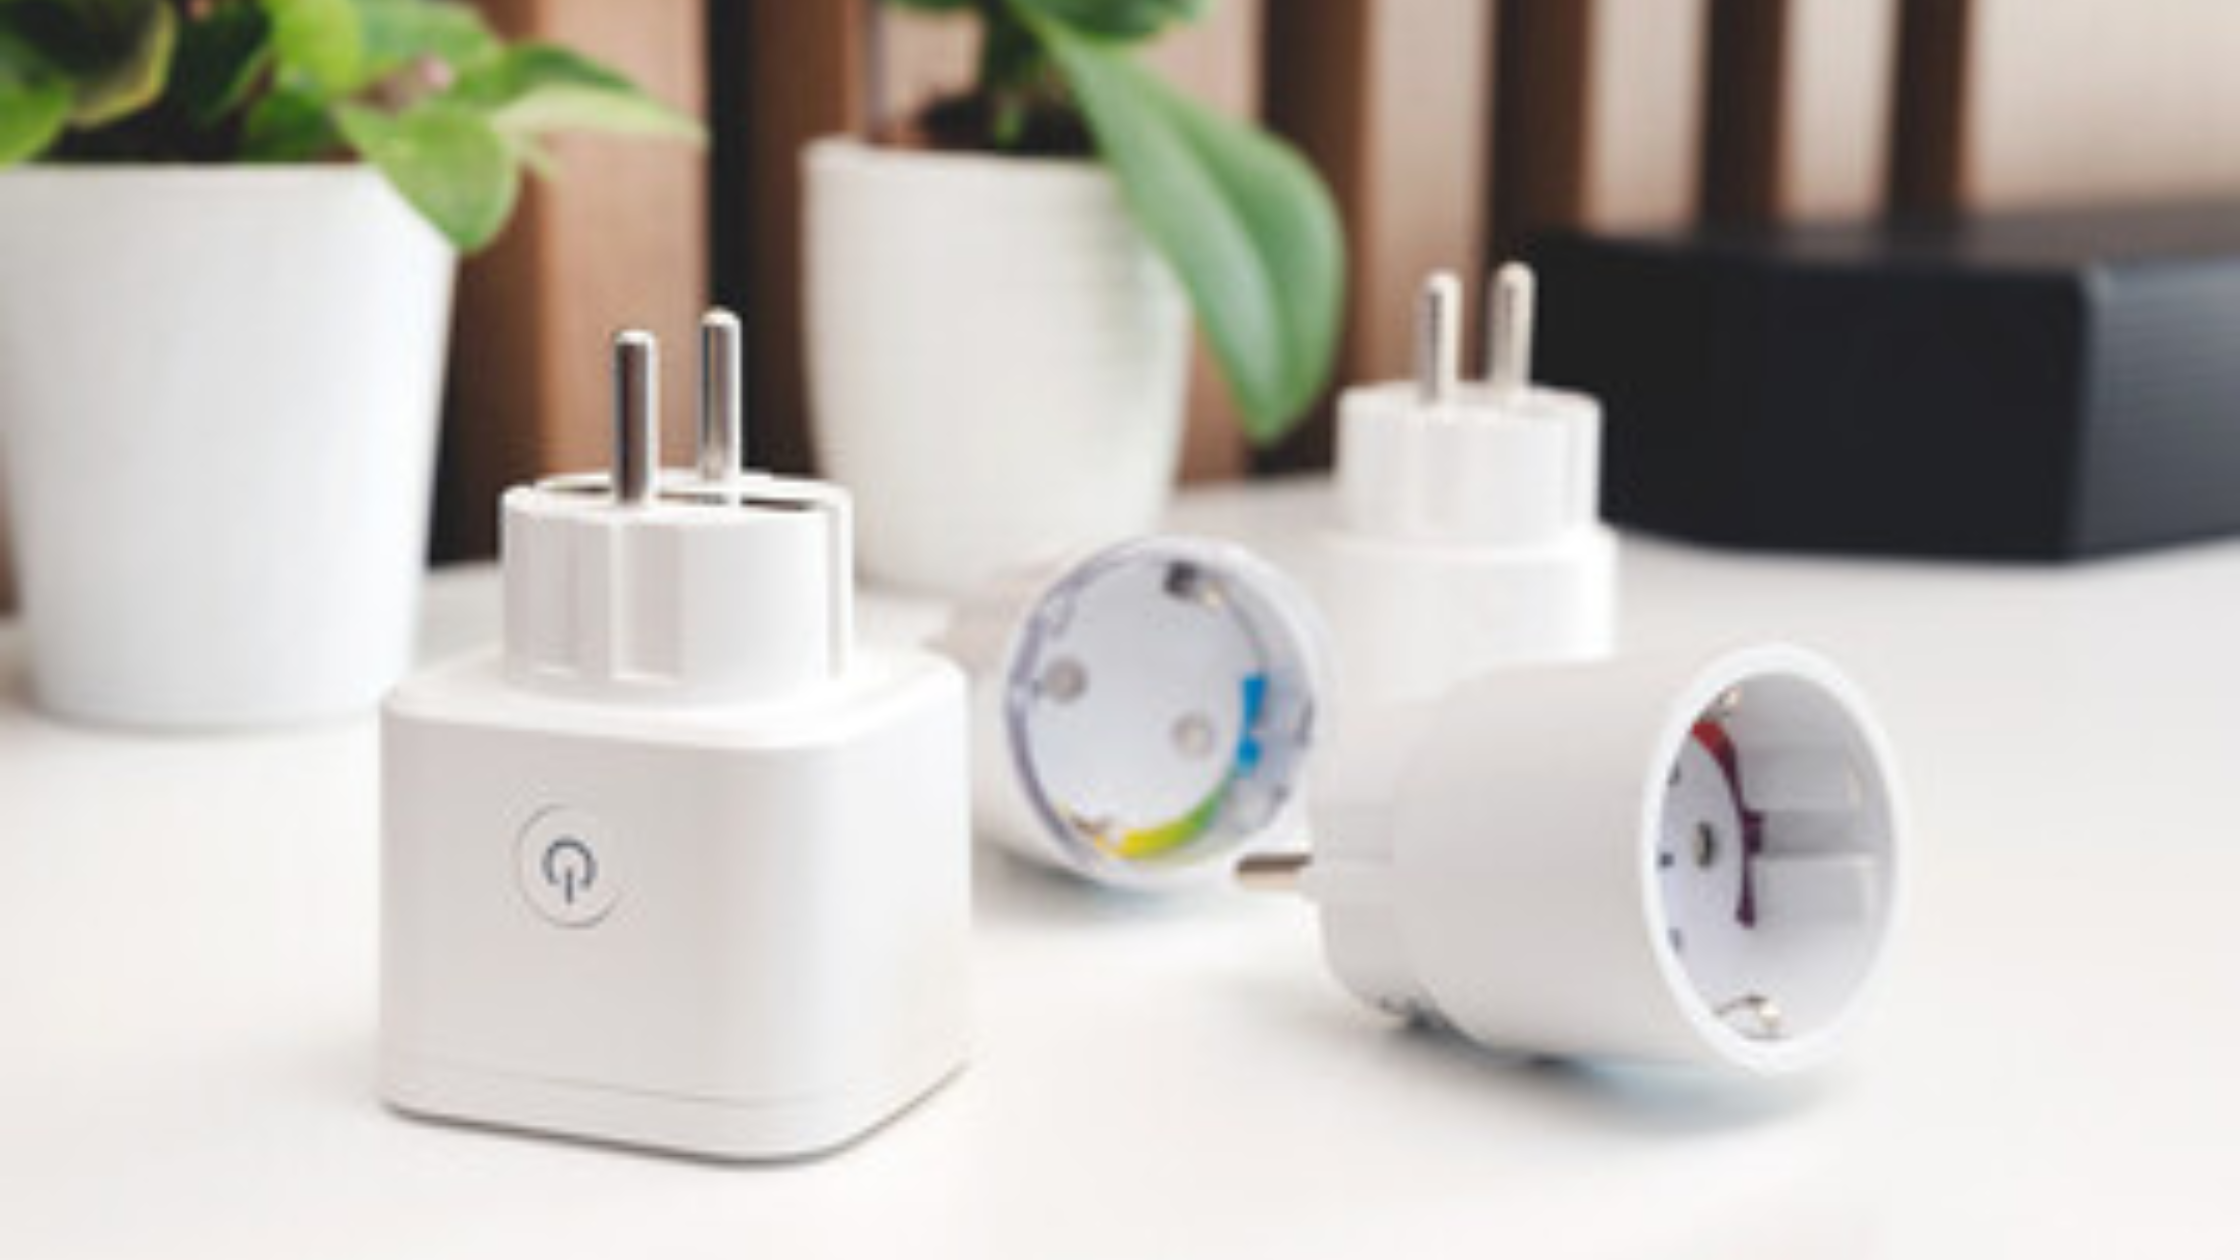 Smart Plugs: Easily control your devices remotely from your phone. Schedule on/off times, monitor energy usage, and integrate with voice assistants for hands-free convenience.